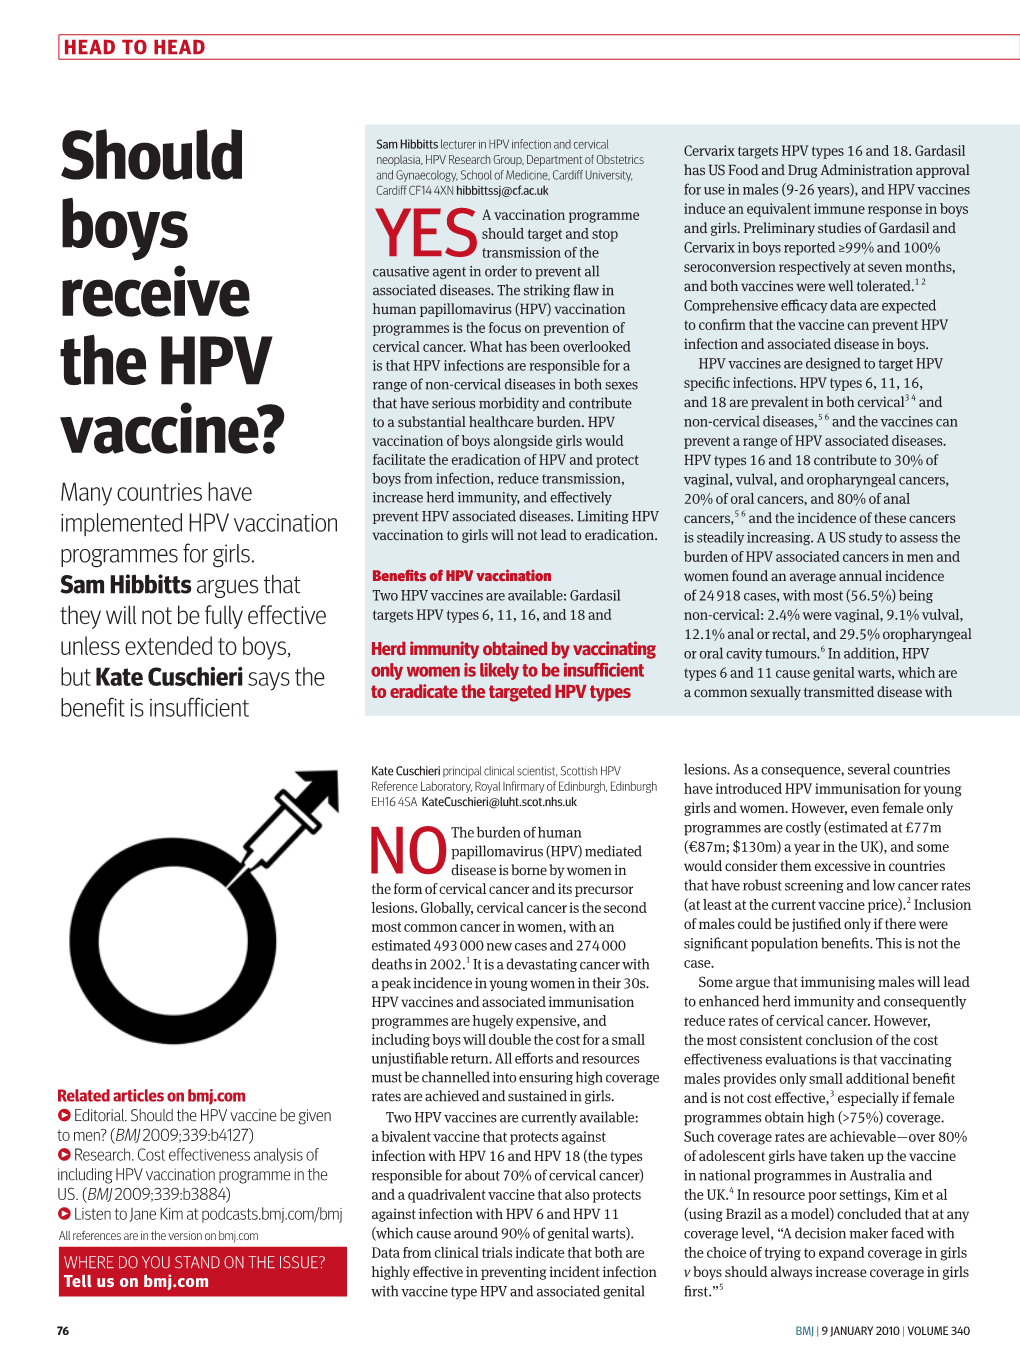 Should Boys Receive the Hpv Vaccine?